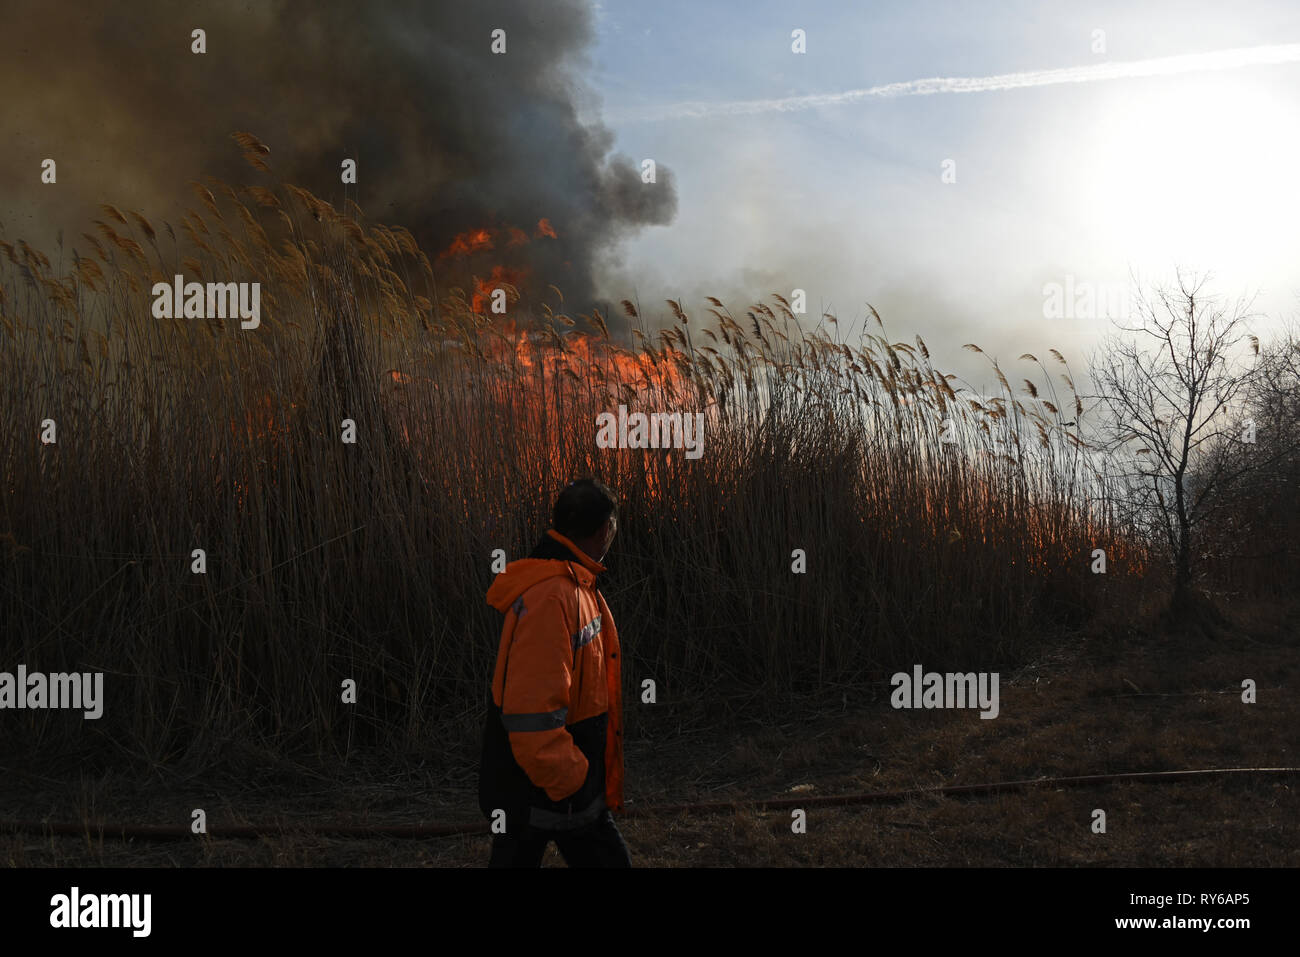 Astrakhan, Russia. 12th March, 2019.  Extinguishing of the steppe fire in Astrakhan, Russia. Every spring there are fires in the steppe area of Astrakhan region. Most of them is a result of focused burnings by unknown persons. Credit: Maxim Korotchenko/Alamy Live News. Stock Photo